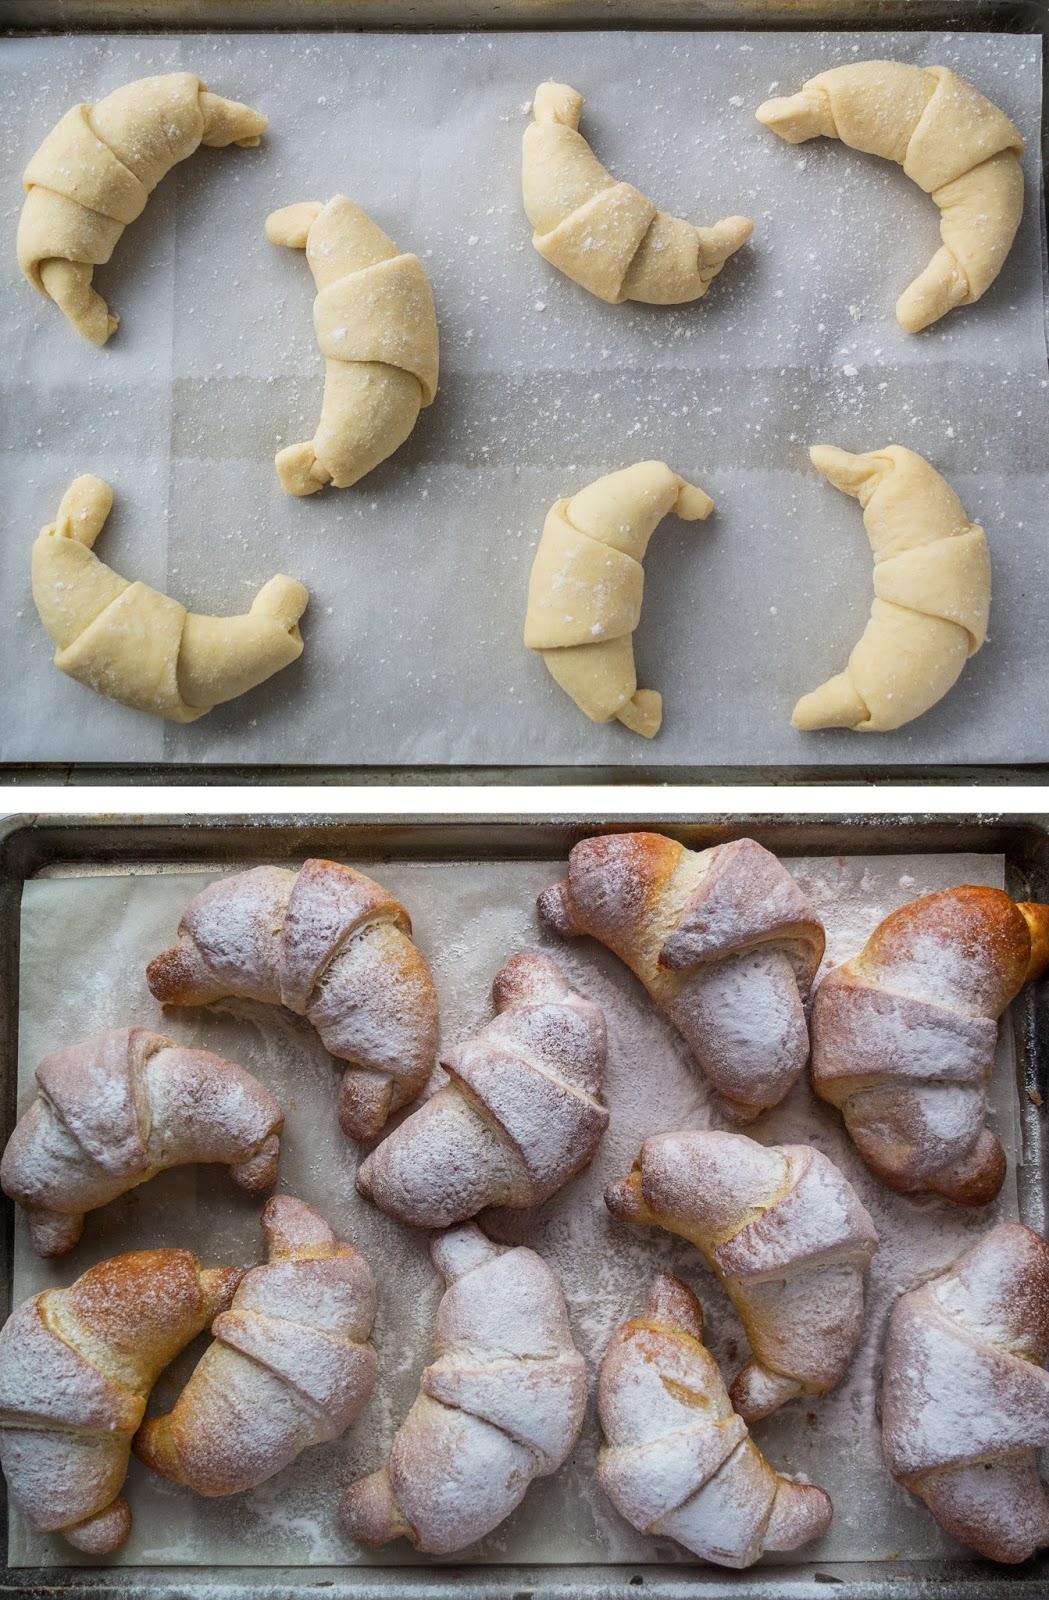 Nutella crescents before and after being baked on a silver tray.